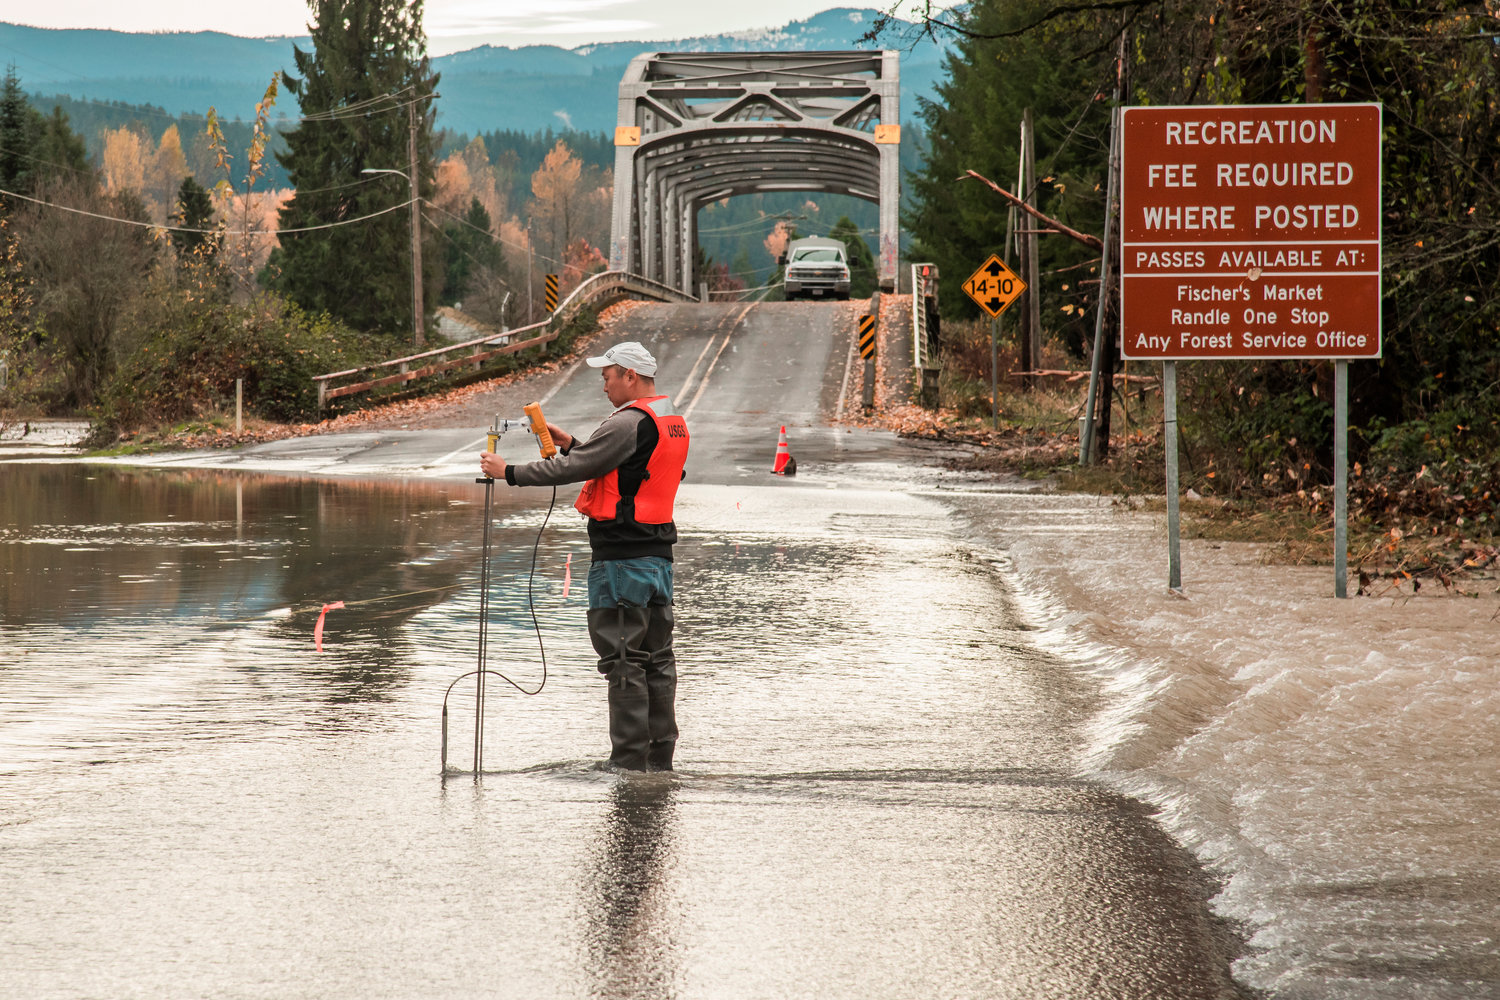 A United States Geological Survey member measures water flows as the Cowlitz River splashes over the roadway along Highway 131 in Randle on Saturday.